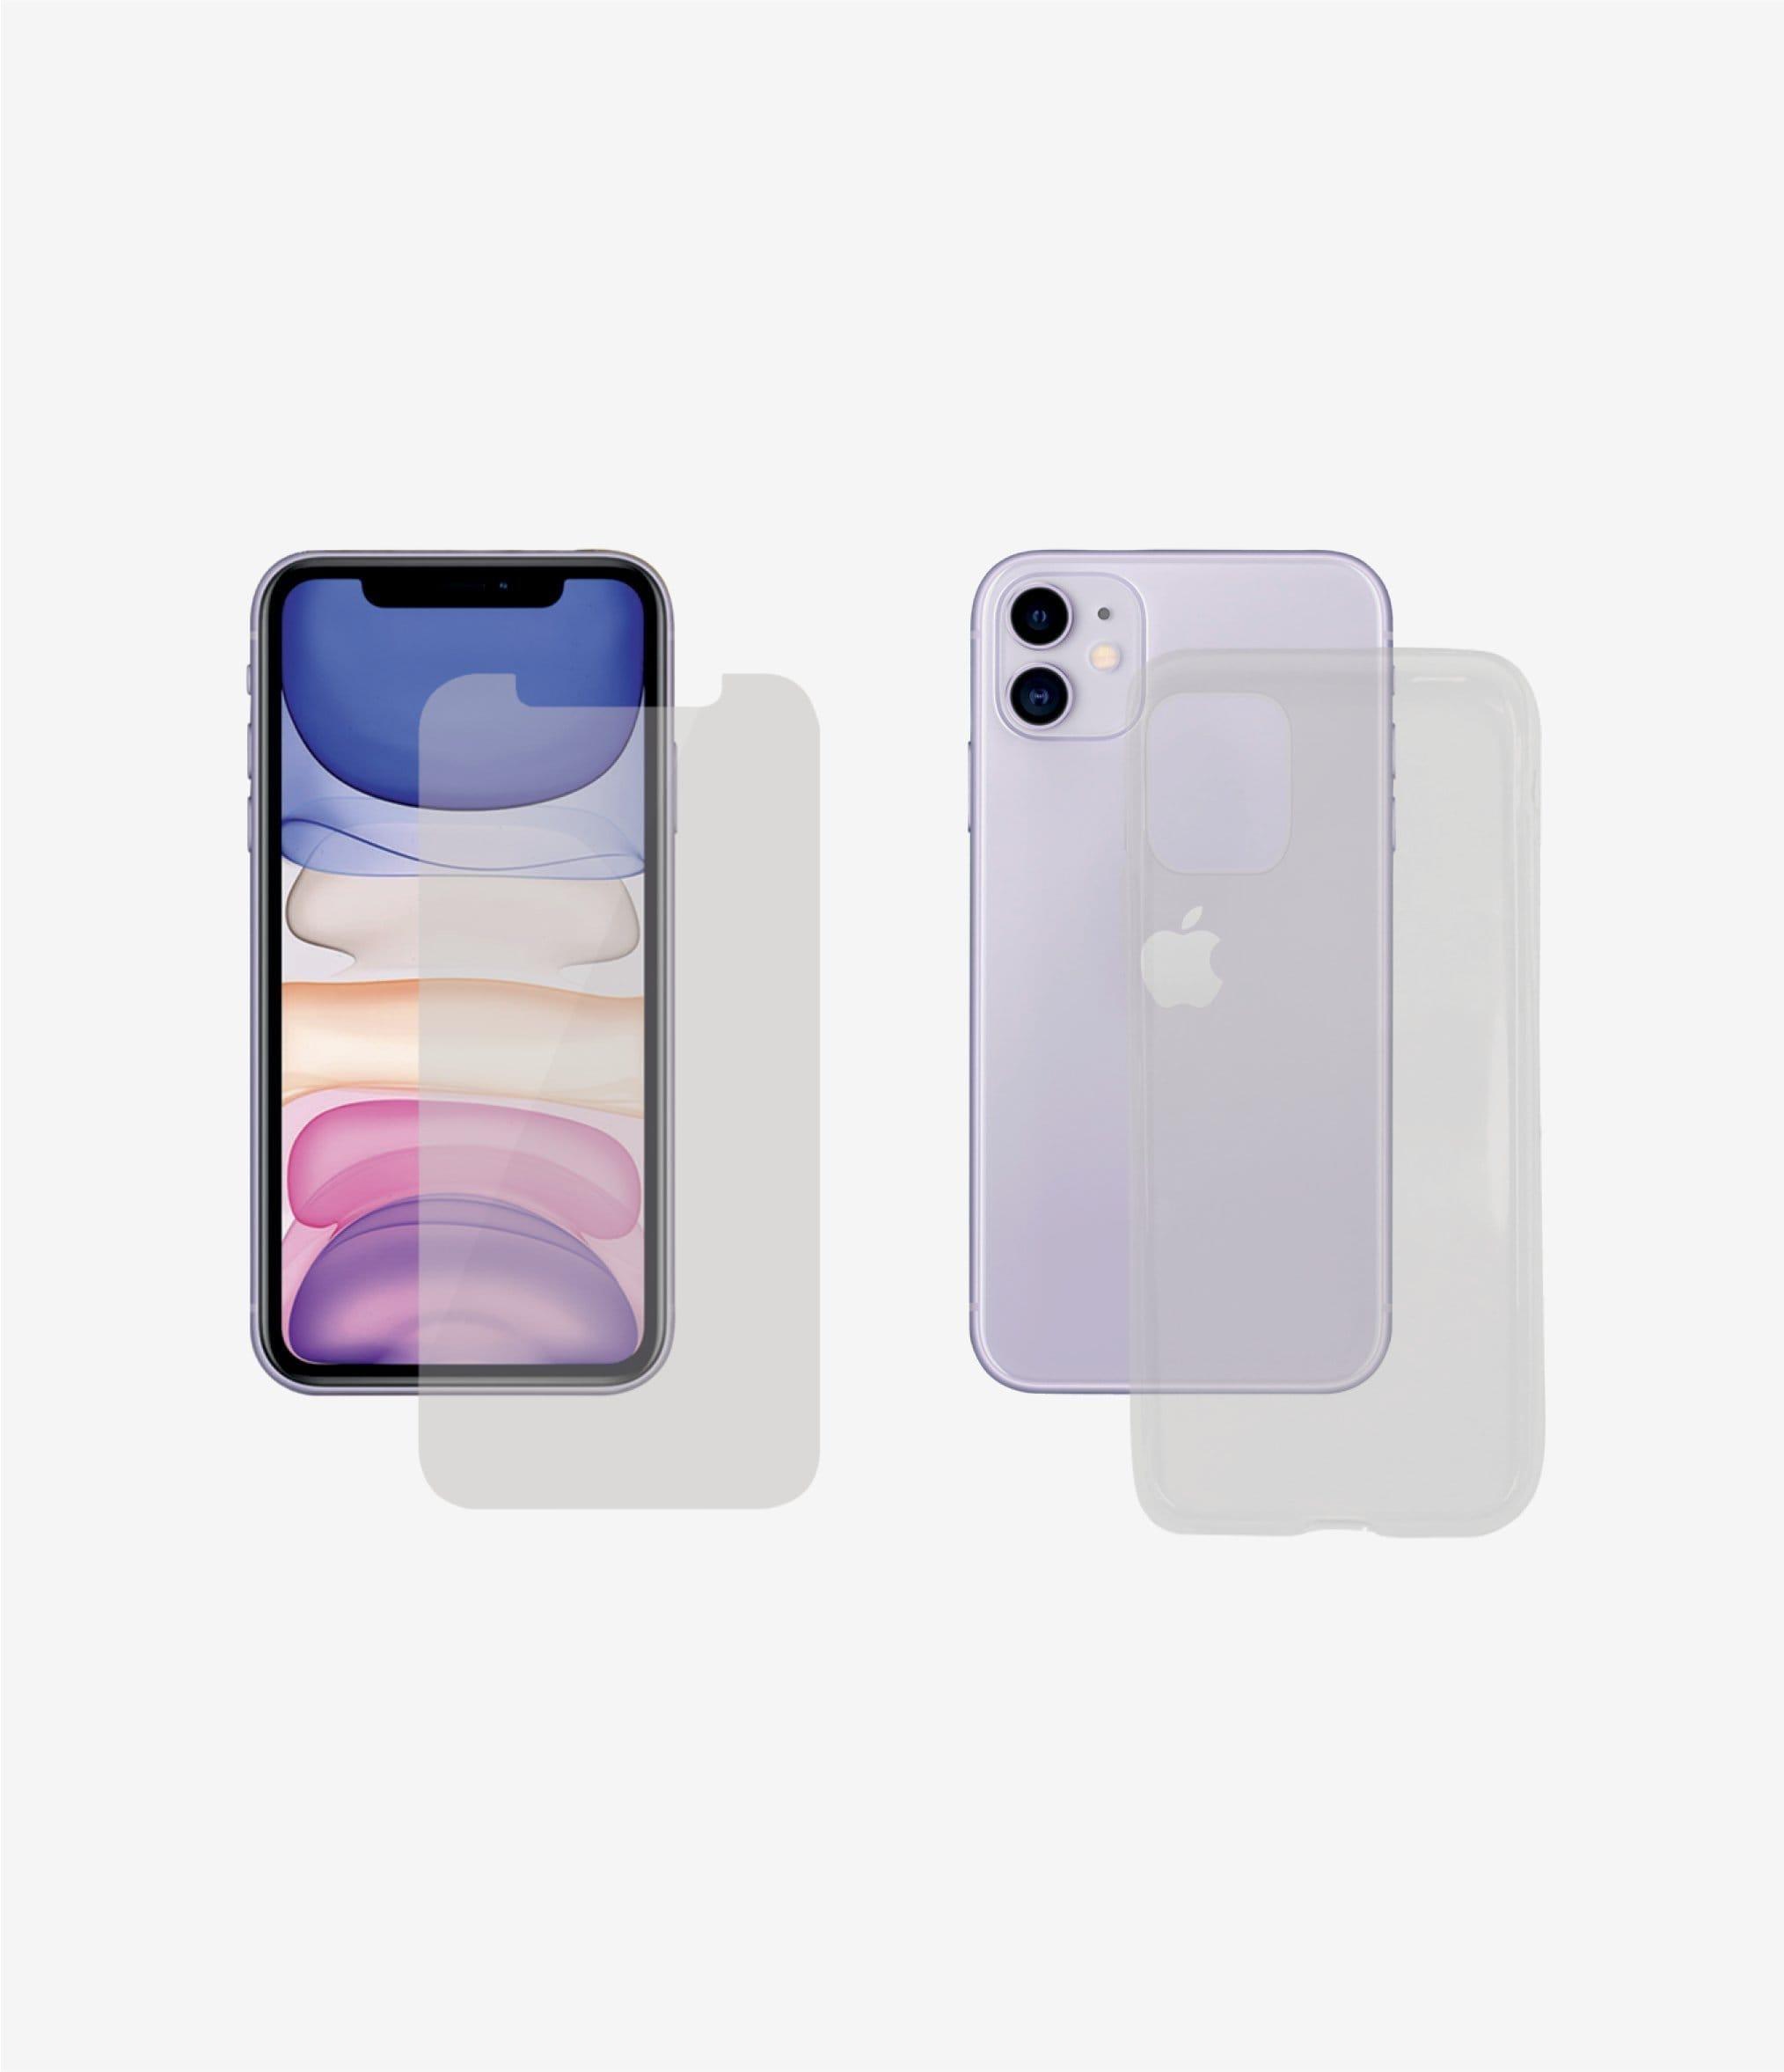 panzerglass case screen protector bundle for iphone 11 clear